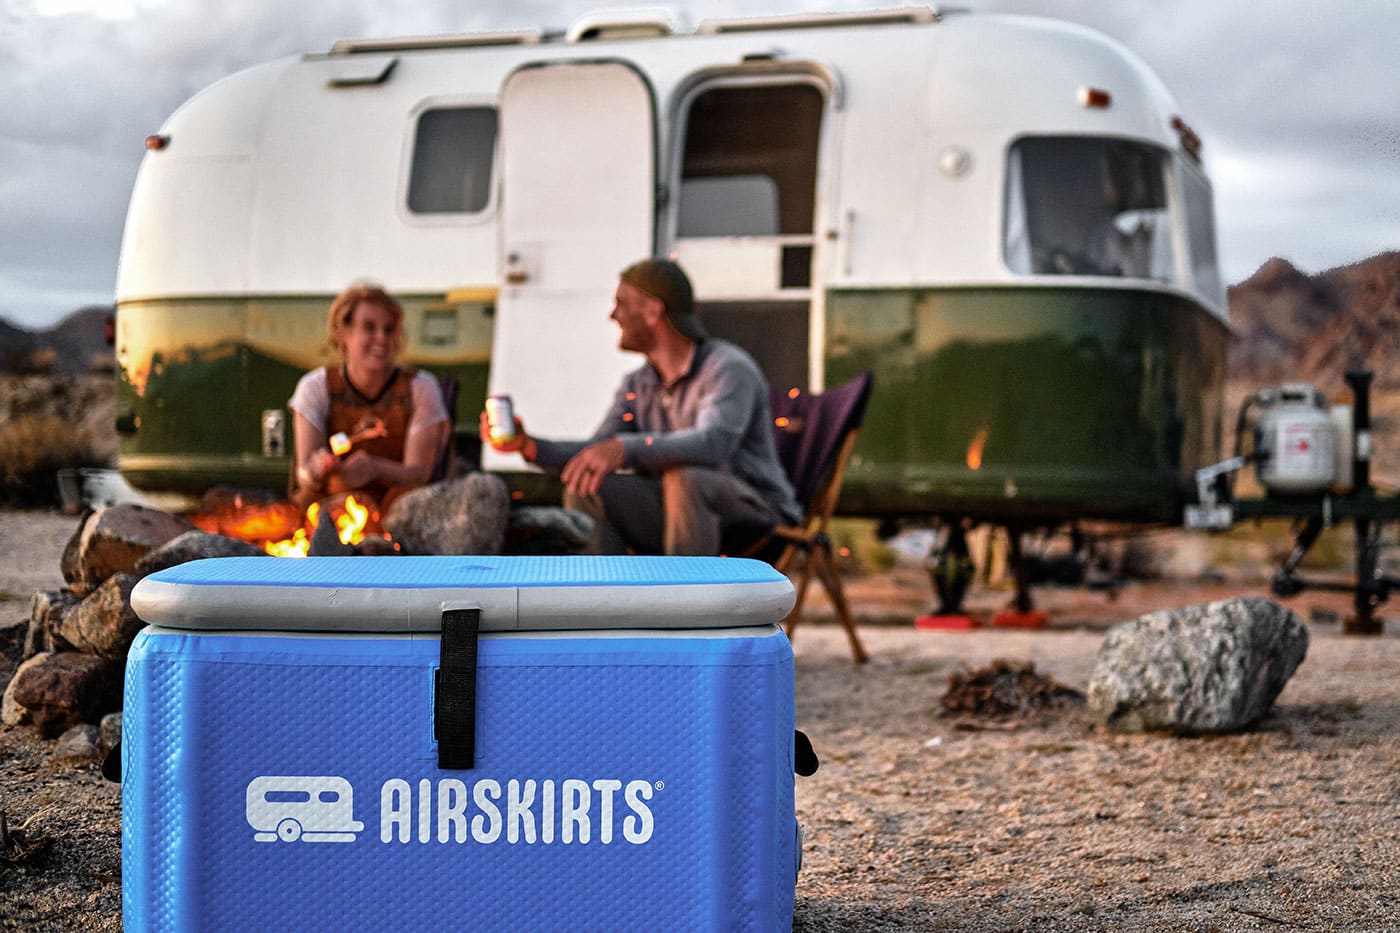 AirSkirts cooler in front of rv camper